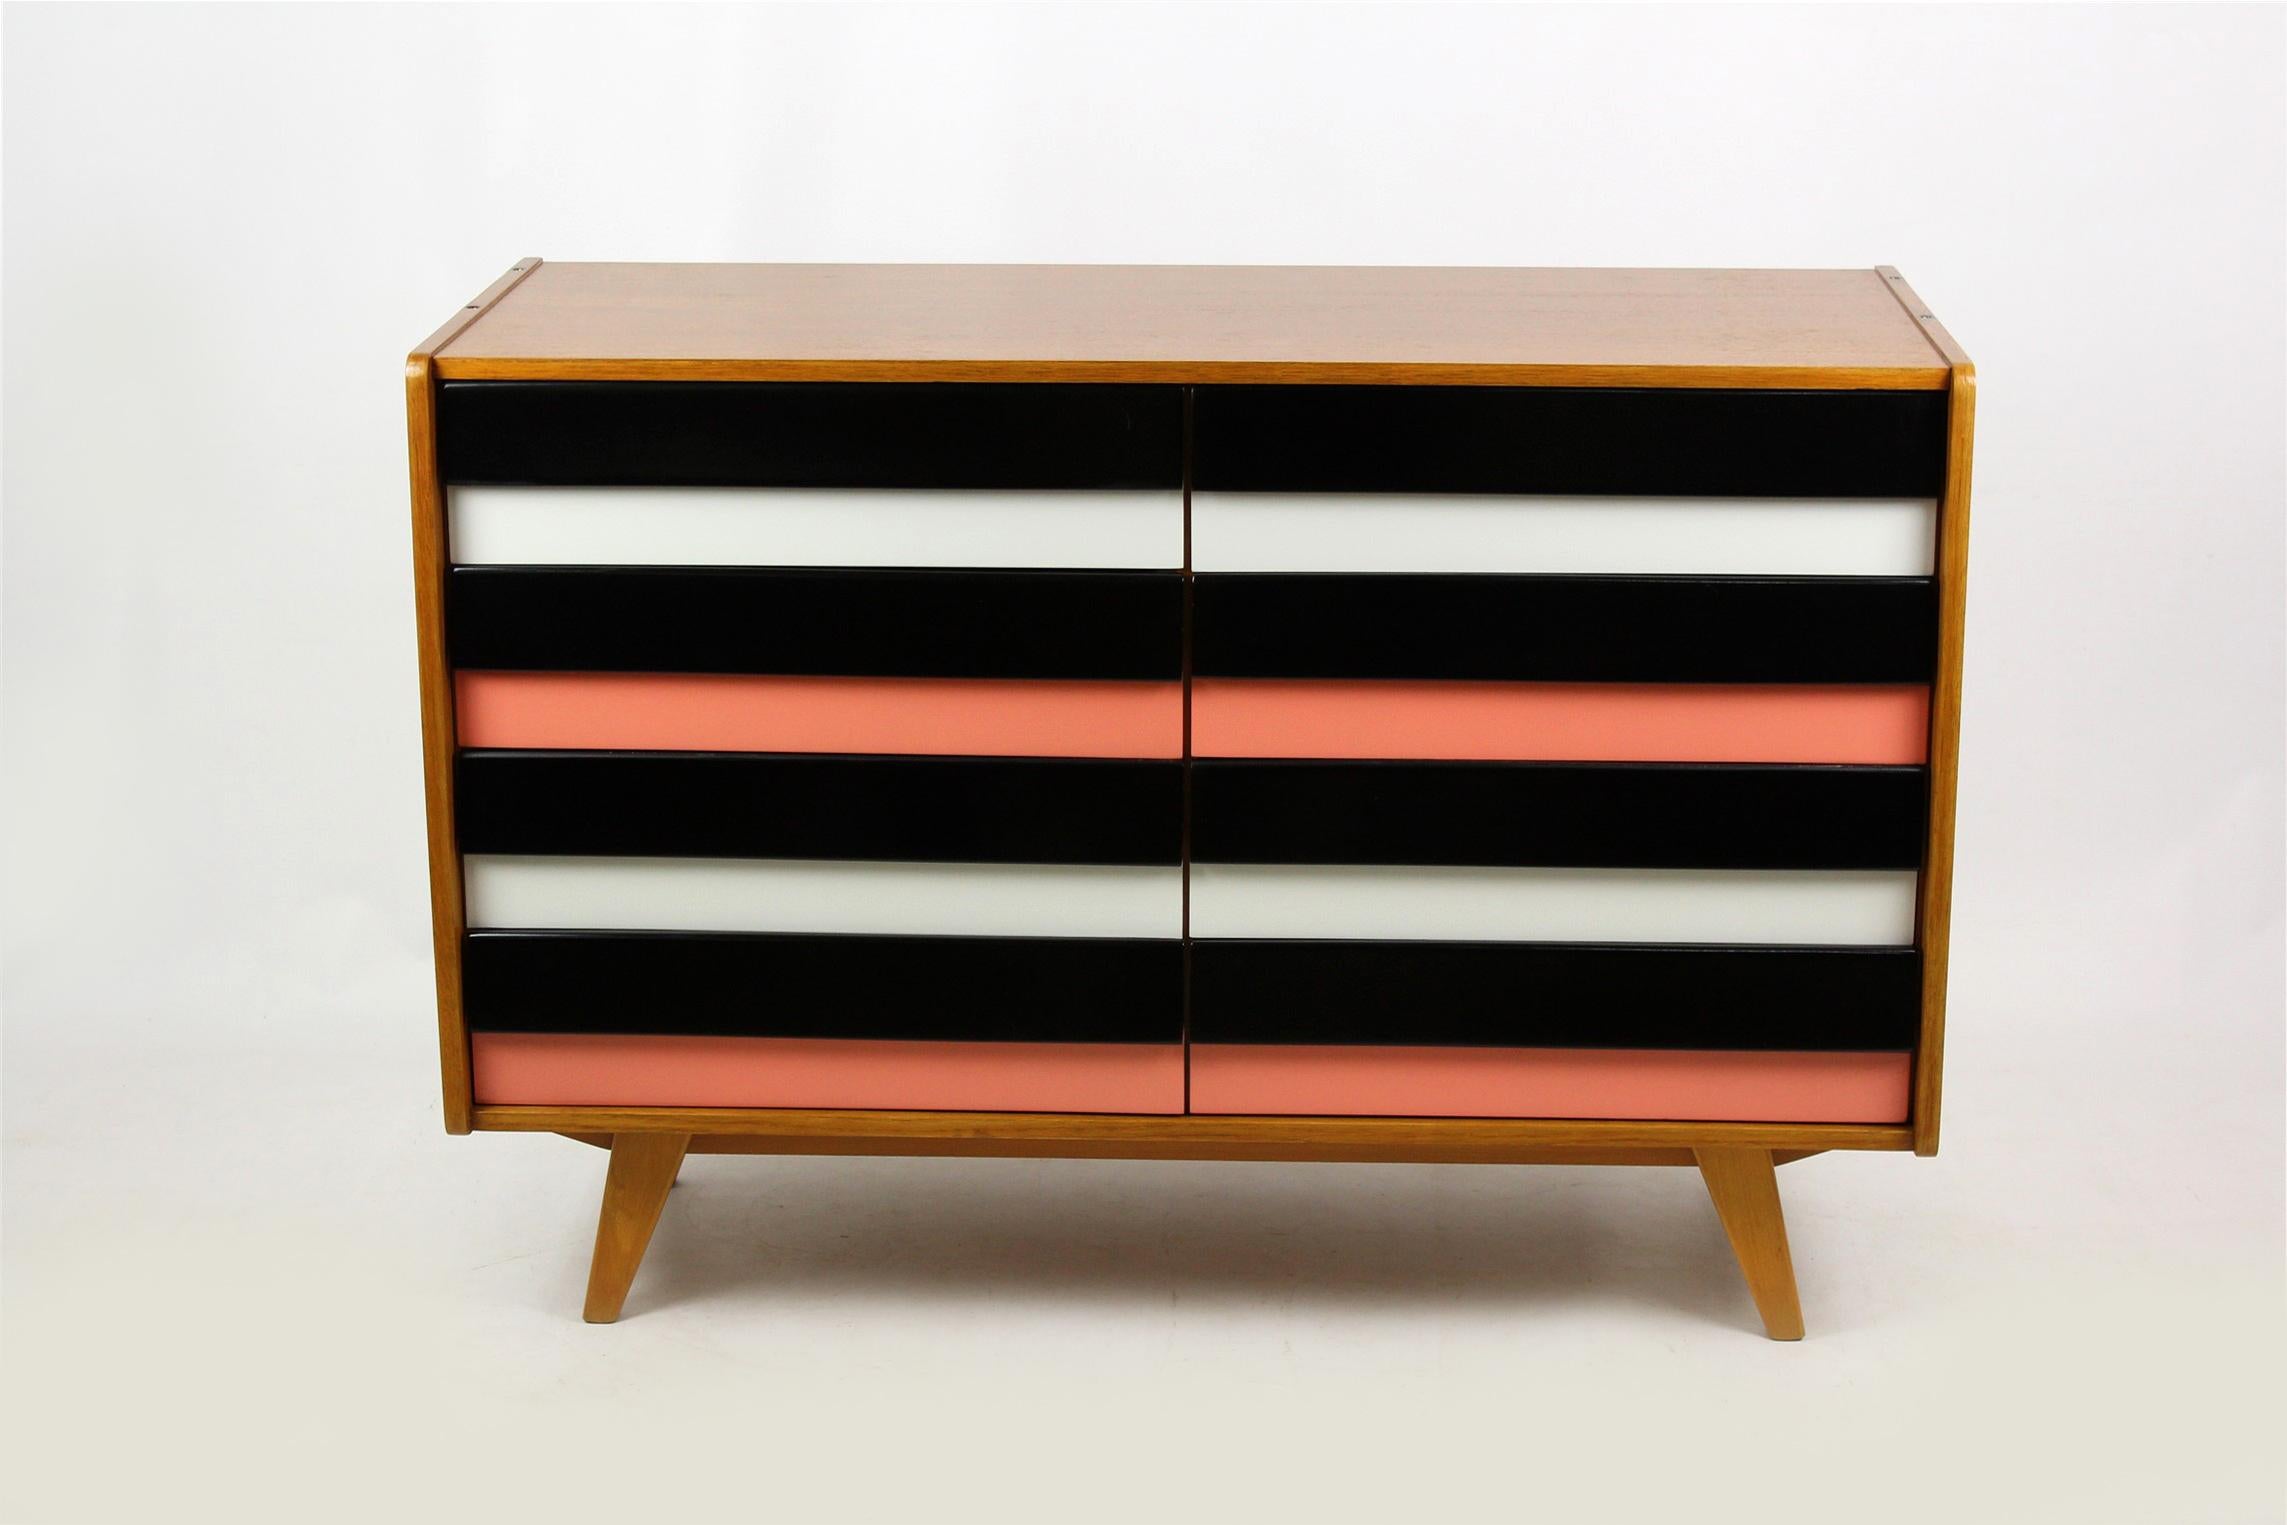 This midcentury wooden chest of drawers was designed by Jirí Jiroutek for Interiér Praha in the 1960s. Woodwork has been completely restored, finished in satin varnish. Pink and white/black fronts kept in original, good condition.